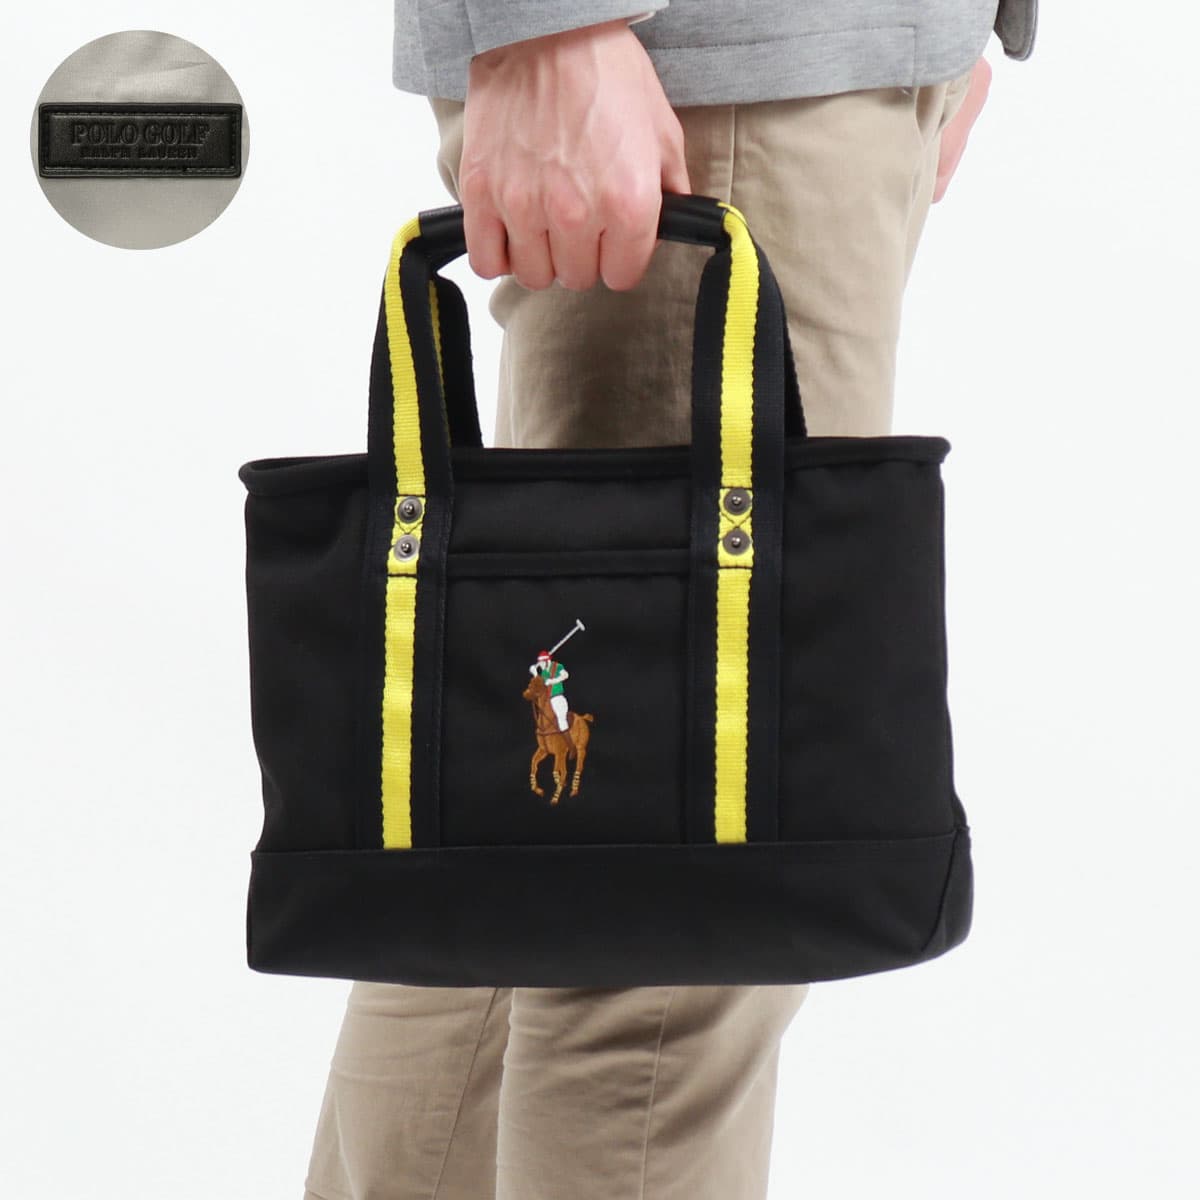 POLO RALPH LAUREN ポロラルフローレン POLO GOLF Color Pony Cart Pouch トートバッグ RLZ008A